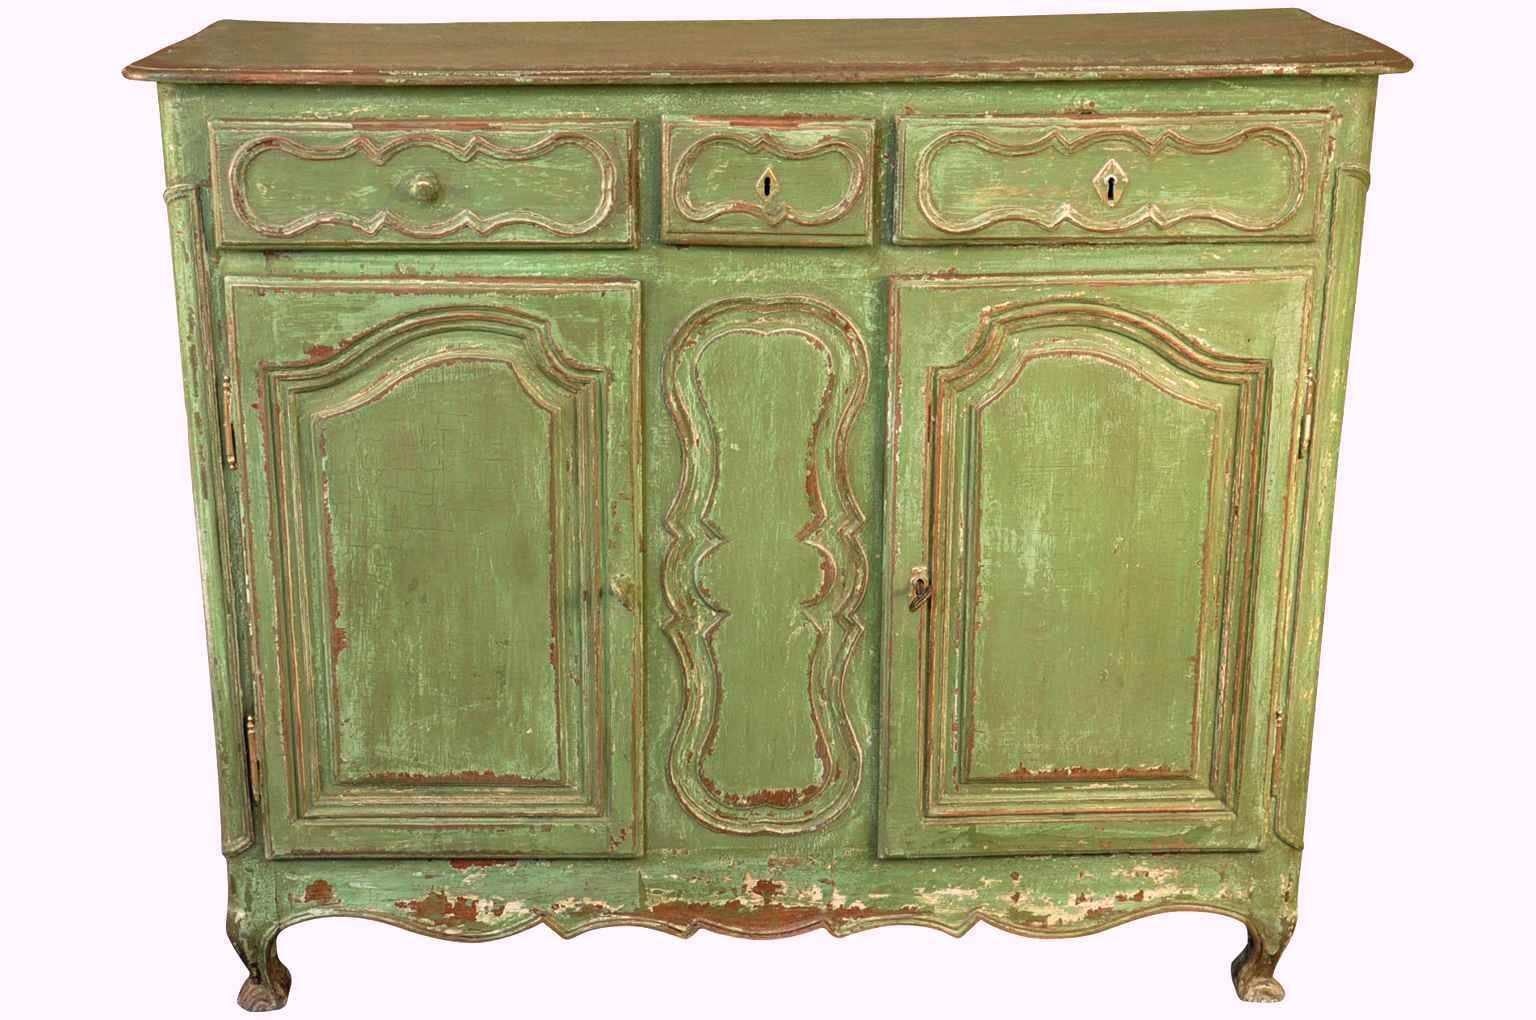 A very handsome French Provencal 18th century buffet in painted wood from the South of France. Wonderfully constructed with double doors and three drawers. Terrific painted finish and patina. A wonderful piece for any kitchen or living area.